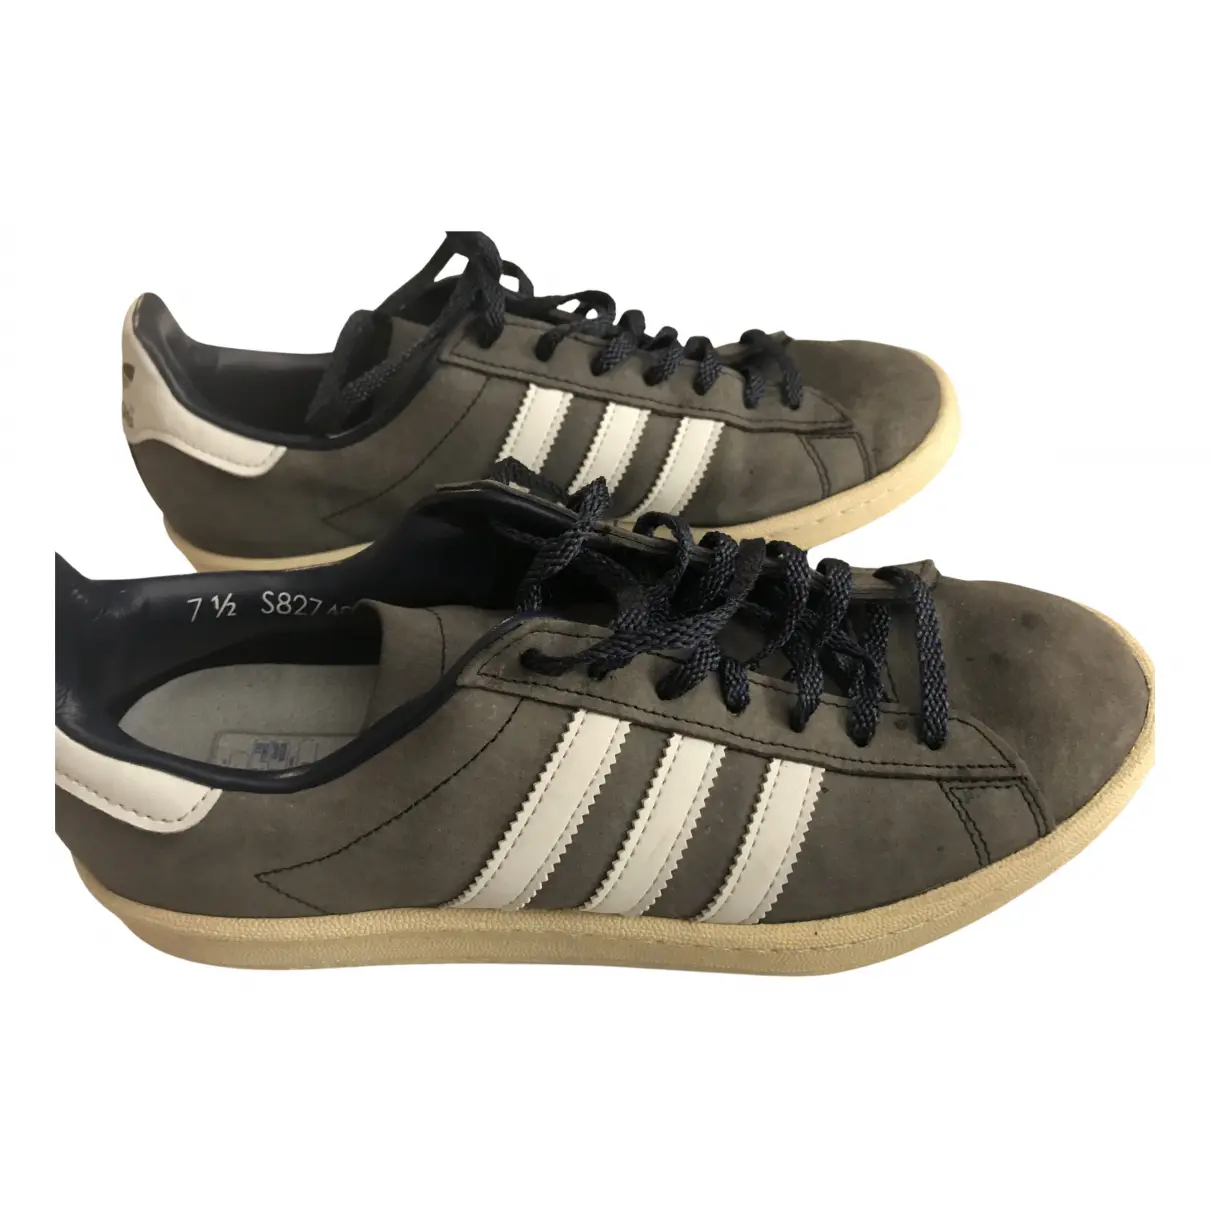 Leather low trainers Adidas